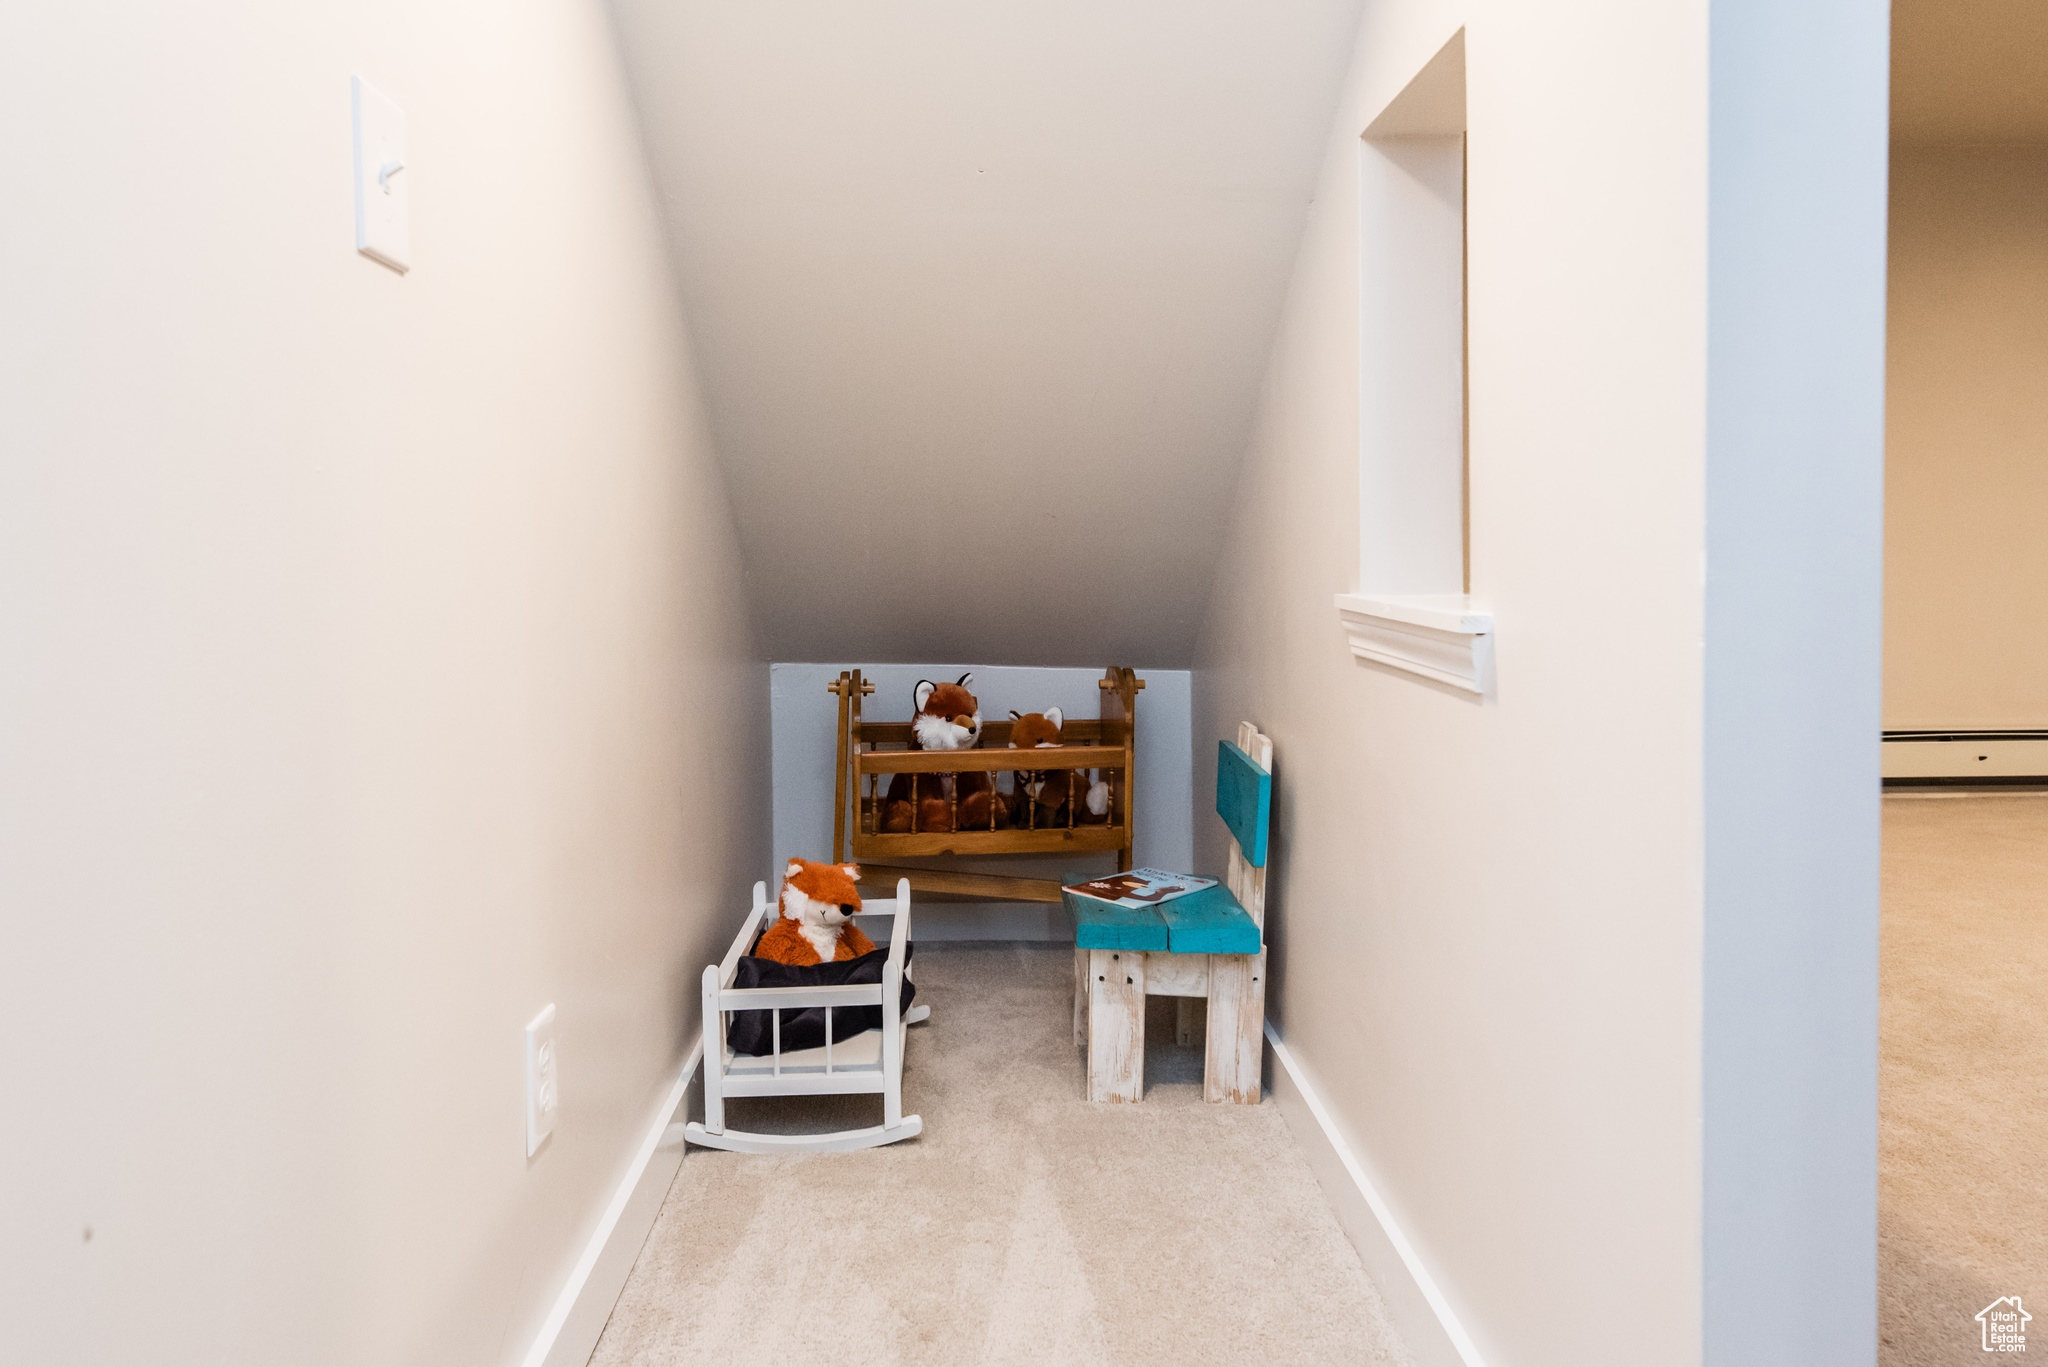 Rec room featuring light carpet, vaulted ceiling, and a baseboard radiator